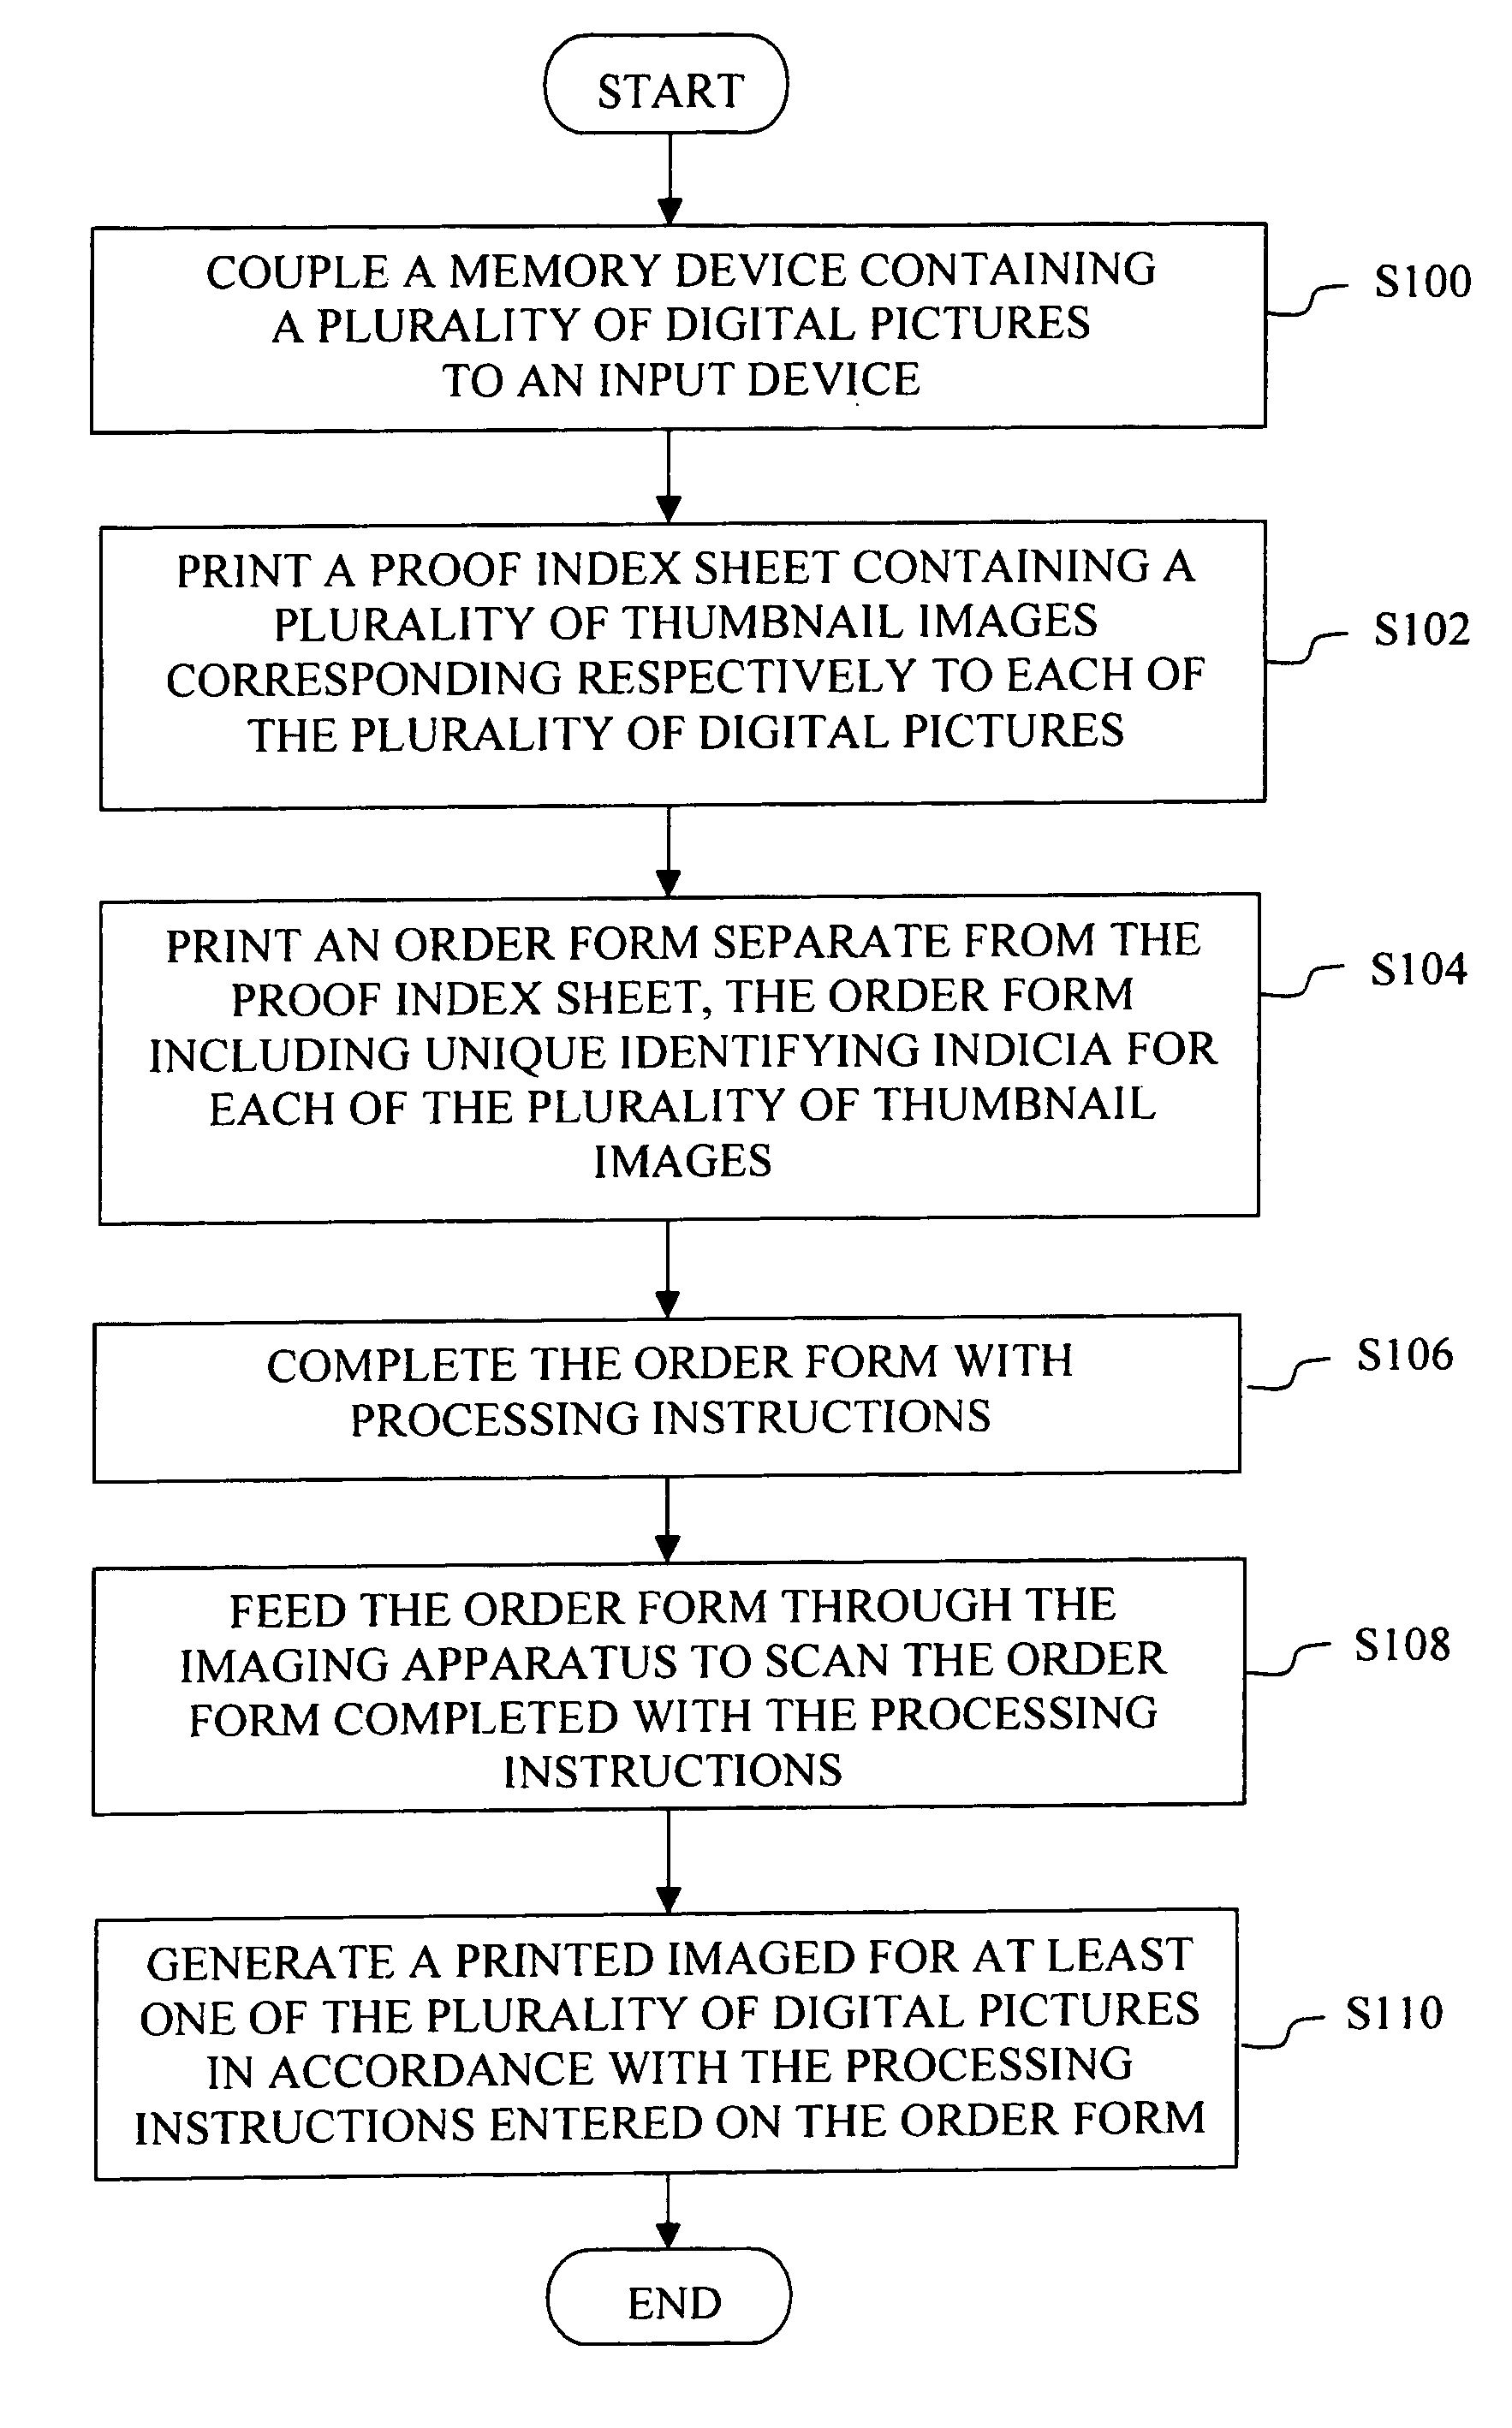 Method for providing image reproduction of digital pictures